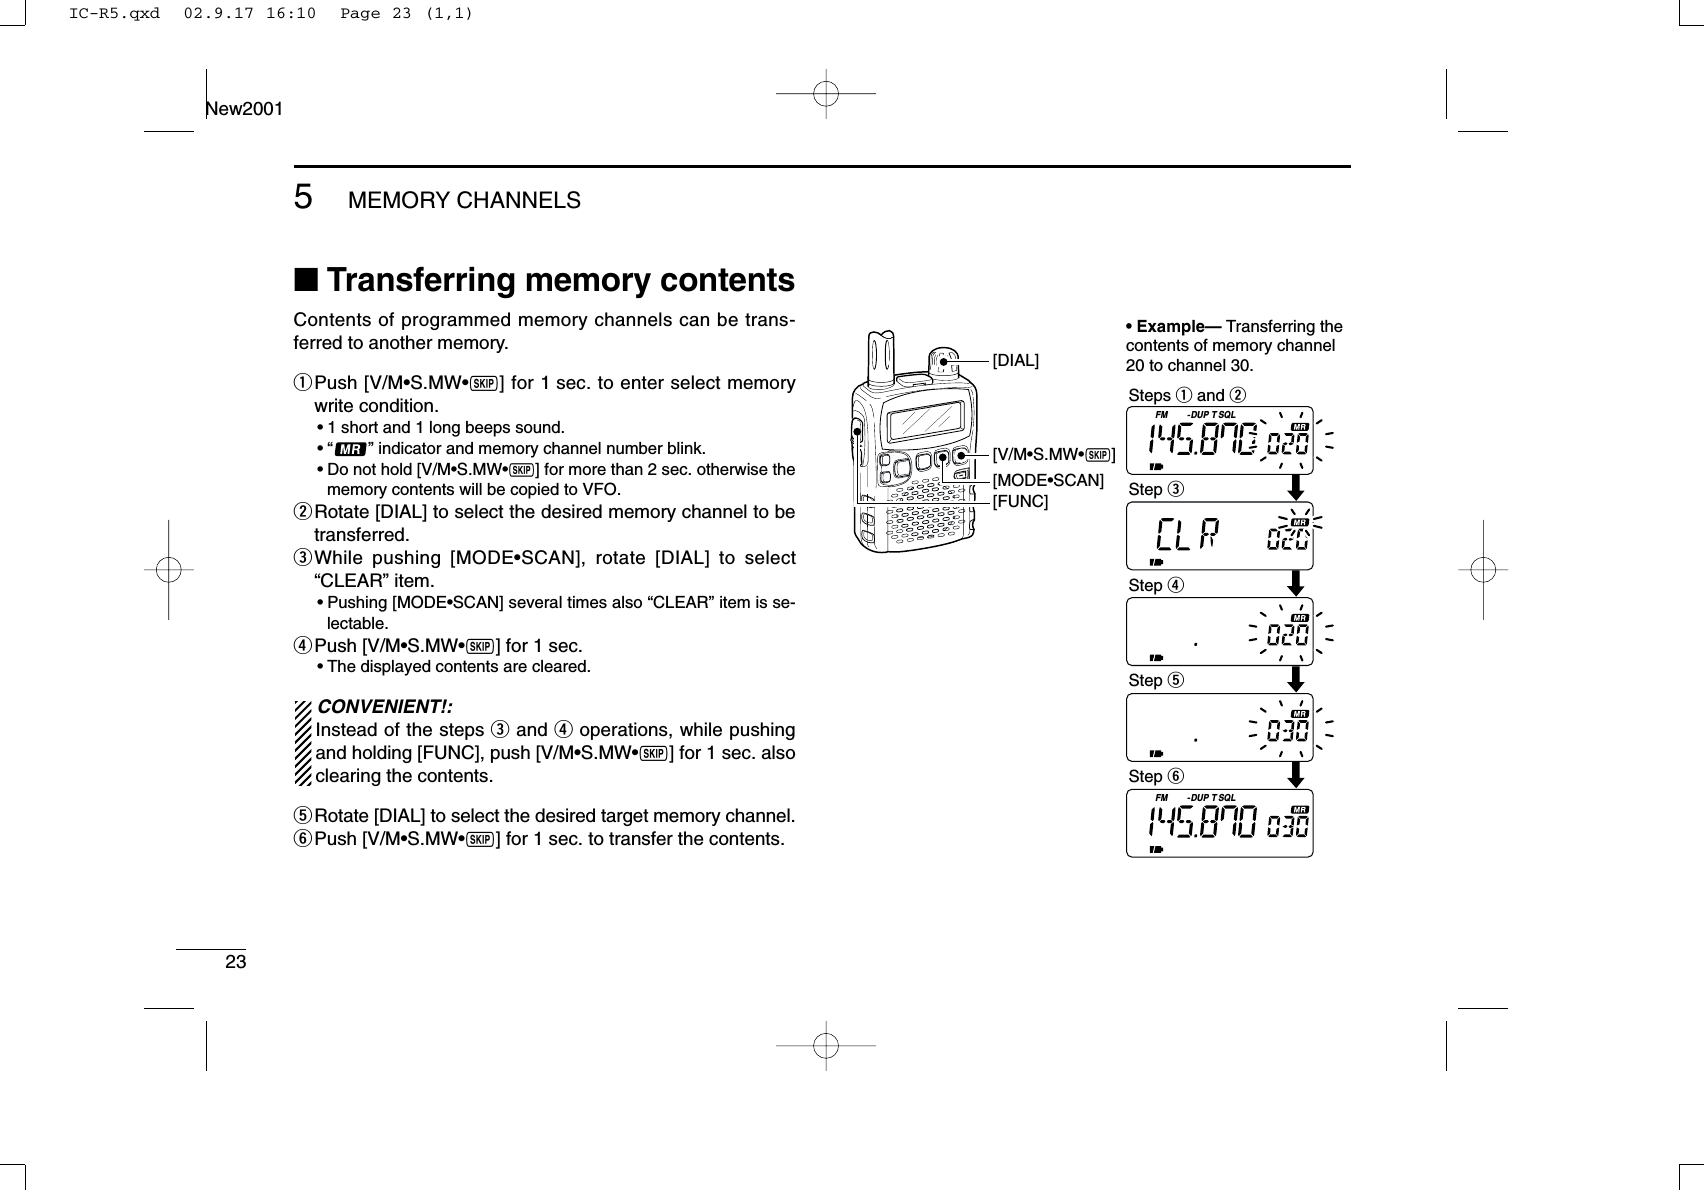 235MEMORY CHANNELSNew2001■Transferring memory contentsContents of programmed memory channels can be trans-ferred to another memory. qPush [V/M•S.MW•~] for 1 sec. to enter select memorywrite condition.•1 short and 1 long beeps sound.•“ ” indicator and memory channel number blink.•Do not hold [V/M•S.MW•~] for more than 2 sec. otherwise thememory contents will be copied to VFO.wRotate [DIAL] to select the desired memory channel to betransferred.eWhile pushing [MODE•SCAN], rotate [DIAL] to select“CLEAR” item.•Pushing [MODE•SCAN] several times also “CLEAR” item is se-lectable.rPush [V/M•S.MW•~] for 1 sec. •The displayed contents are cleared.CONVENIENT!:Instead of the steps eand roperations, while pushingand holding [FUNC], push [V/M•S.MW•~] for 1 sec. alsoclearing the contents.tRotate [DIAL] to select the desired target memory channel.yPush [V/M•S.MW•~] for 1 sec. to transfer the contents.FM DUP SQLTFM DUP SQLT[V/M•S.MW•~][MODE•SCAN][FUNC][DIAL]• Example— Transferring the contents of memory channel 20 to channel 30.Steps q and wStep eStep rStep tStep yIC-R5.qxd  02.9.17 16:10  Page 23 (1,1)